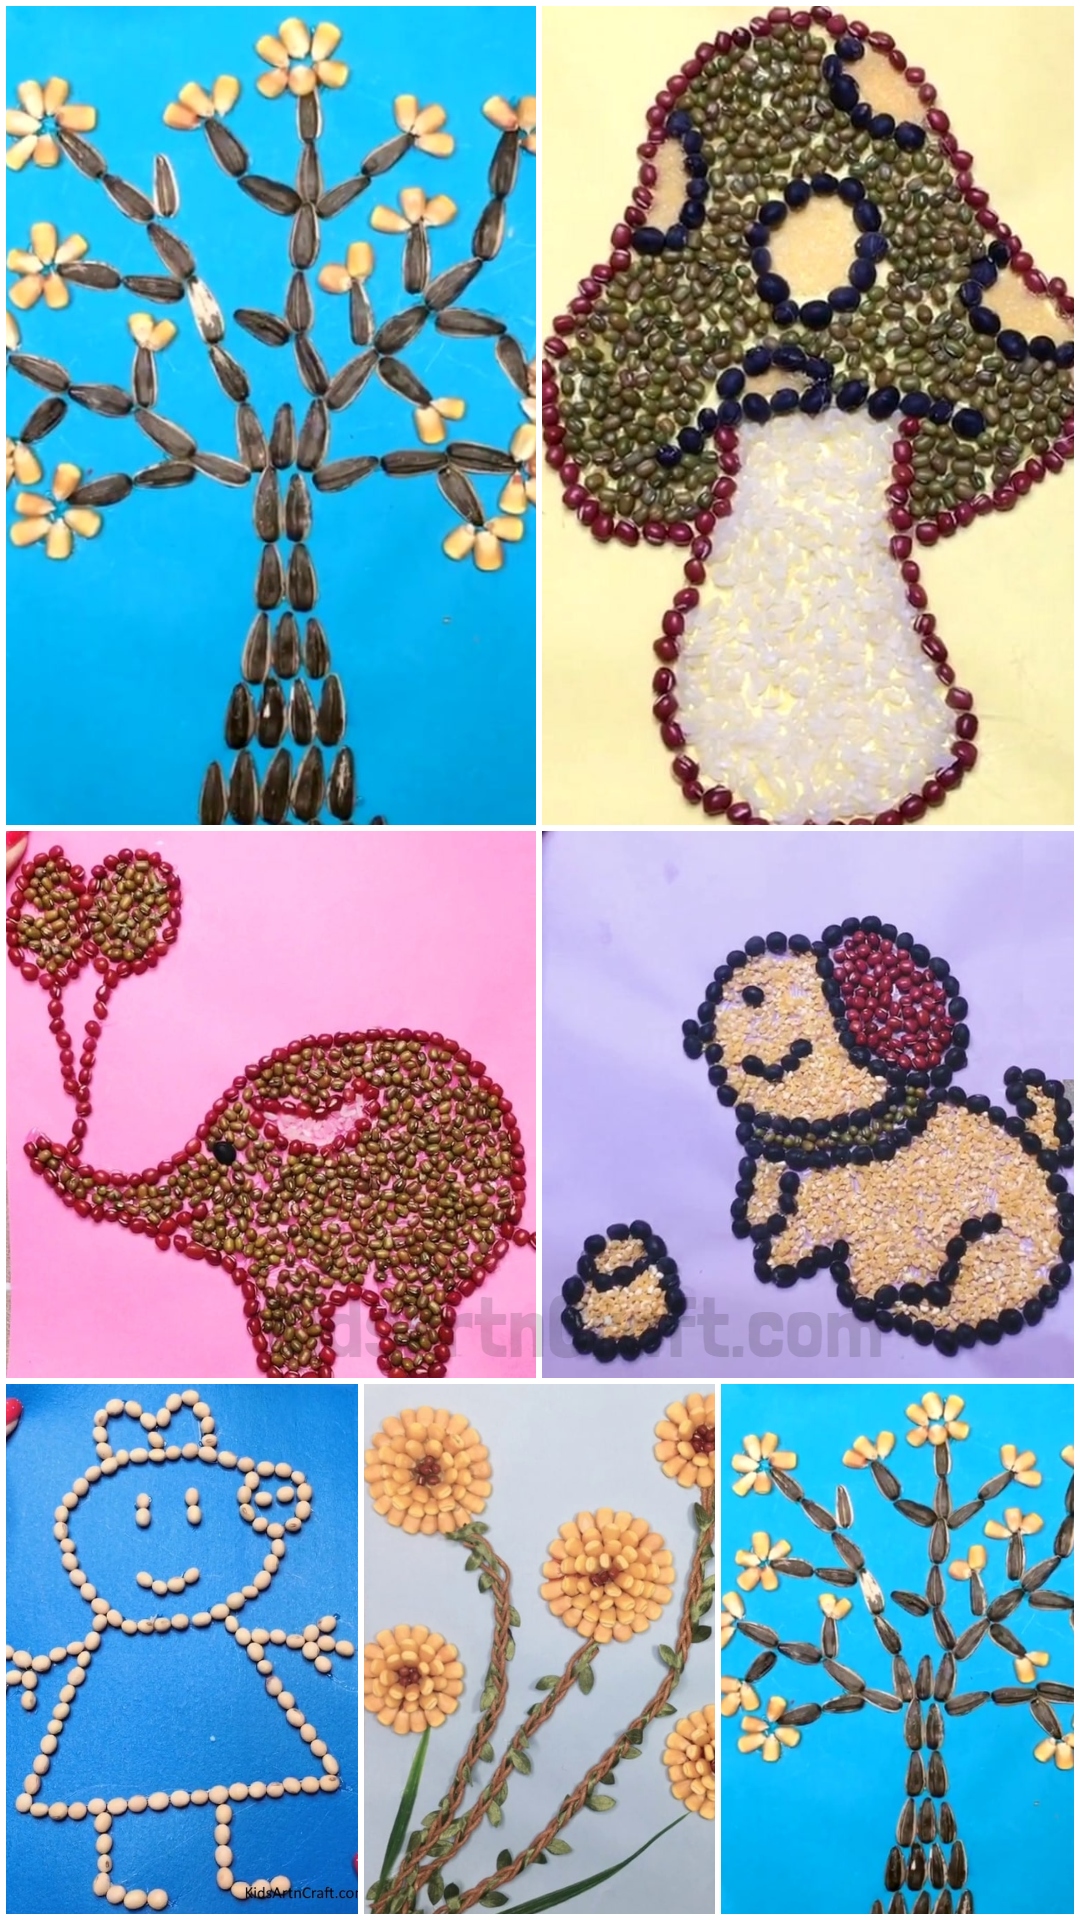 Easy and Simple Craft Ideas Using Cereals and Pulses for Kids